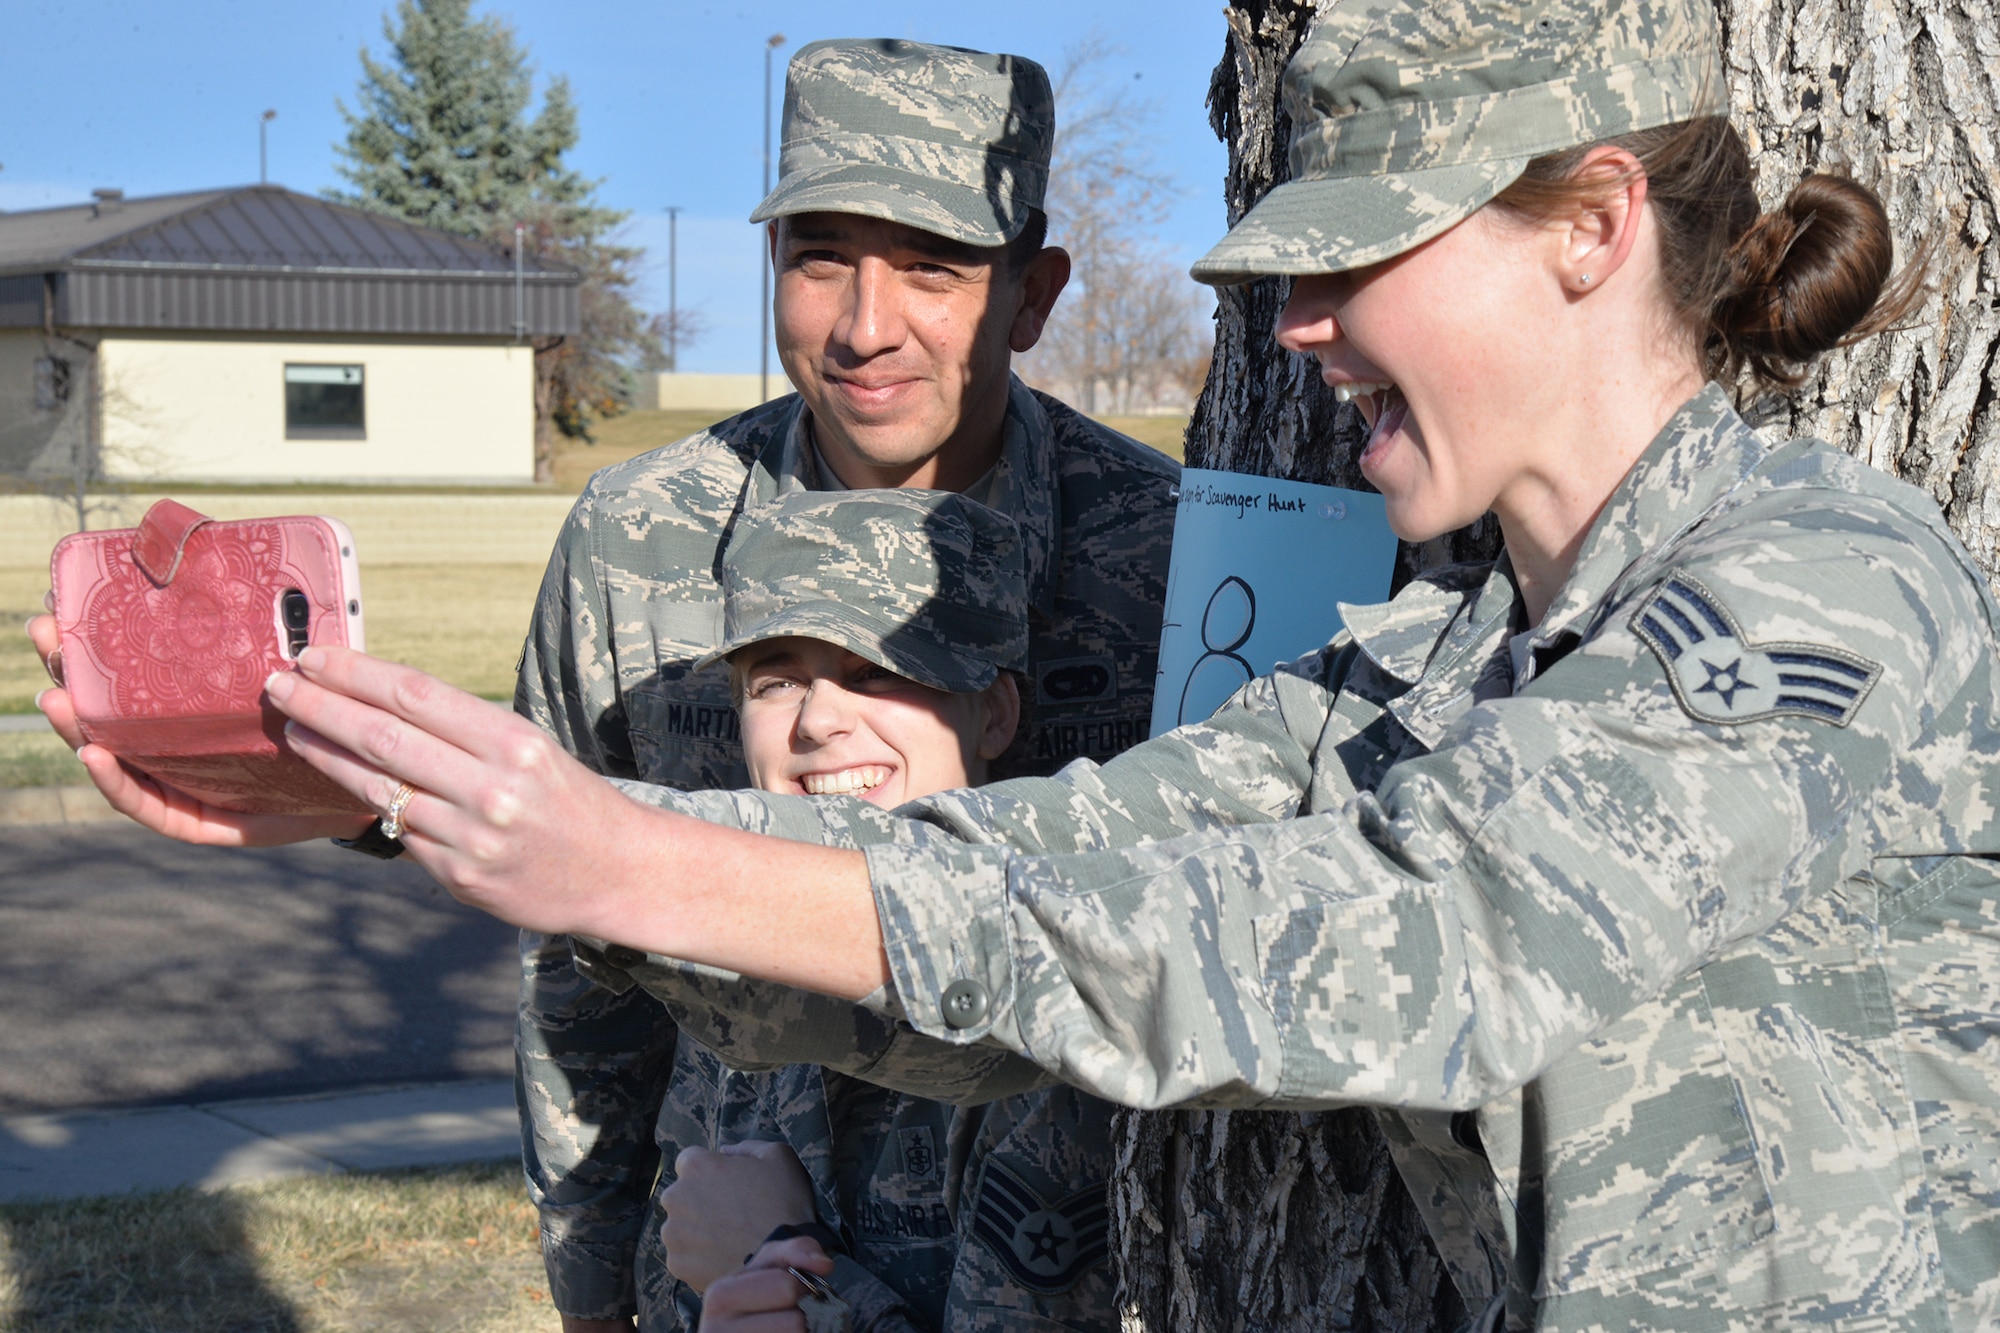 A team of Airmen pose for a selfie at one of the nine clues during an Energy Action Month scavenger hunt Oct. 25, 2017, at Malmstrom Air Force Base, Mont.